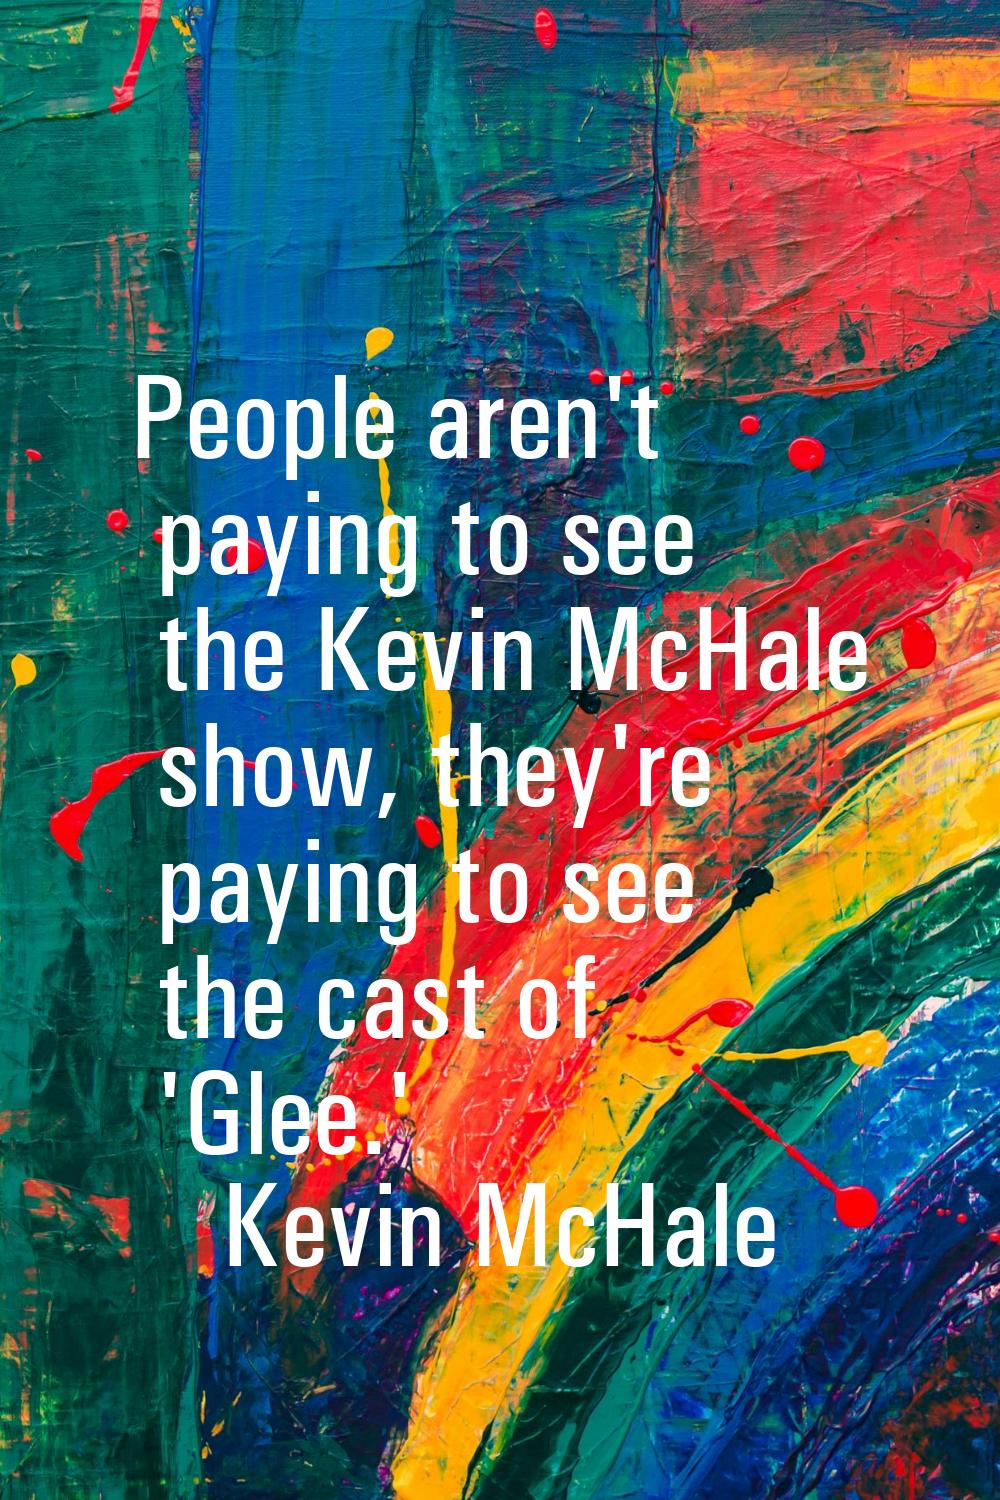 People aren't paying to see the Kevin McHale show, they're paying to see the cast of 'Glee.'